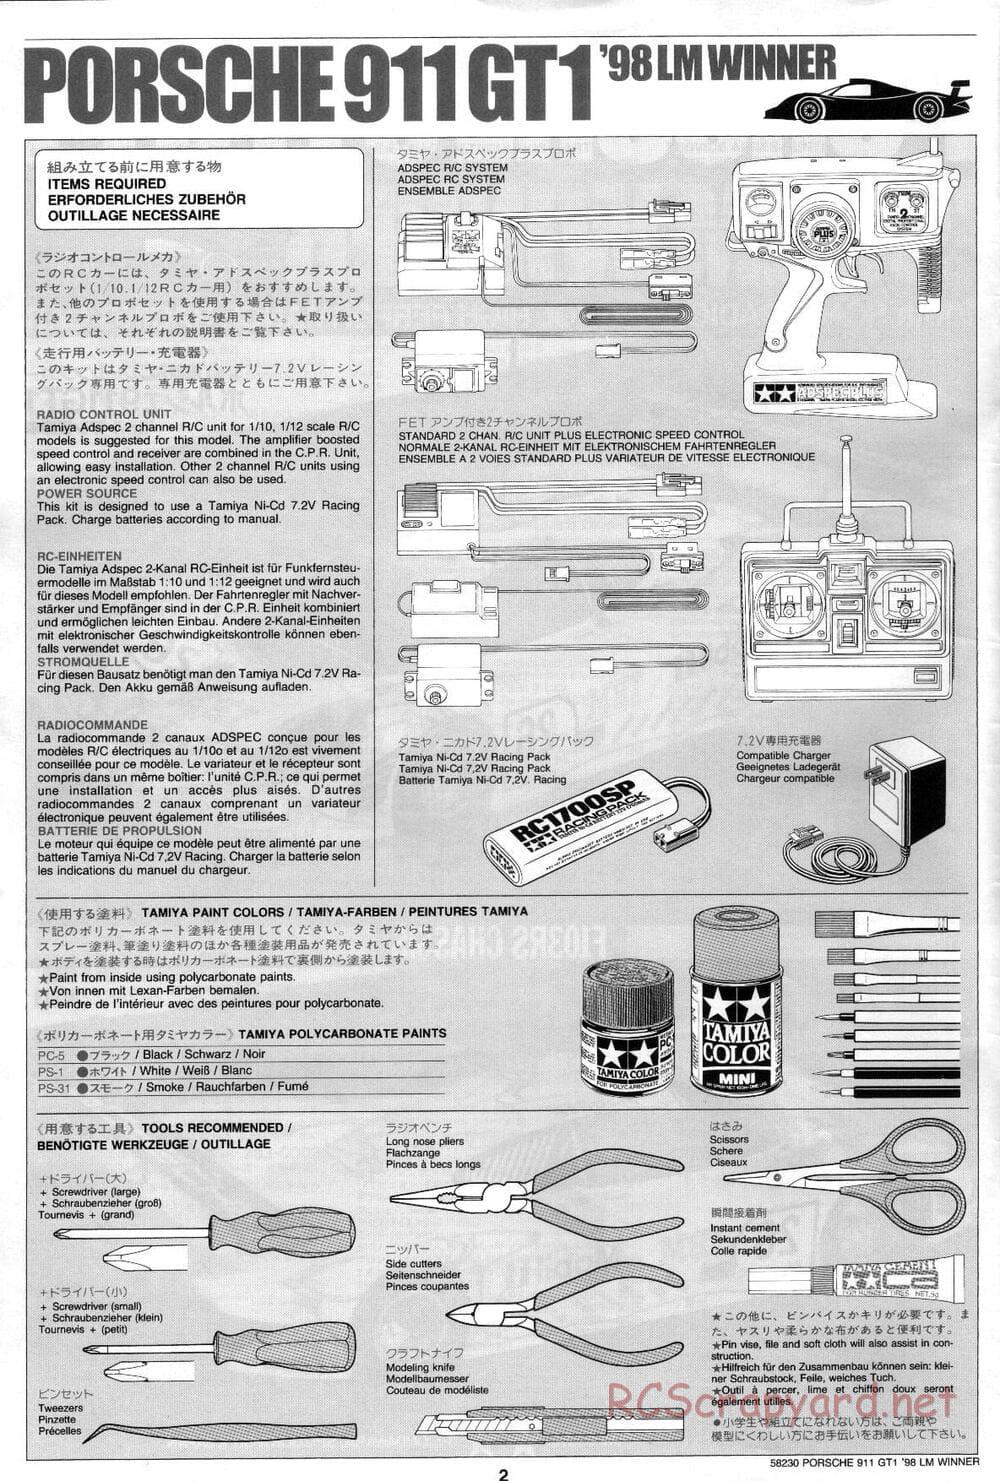 Tamiya - Porsche 911 GT1 98 LM Winner - F103RS Chassis - Manual - Page 2